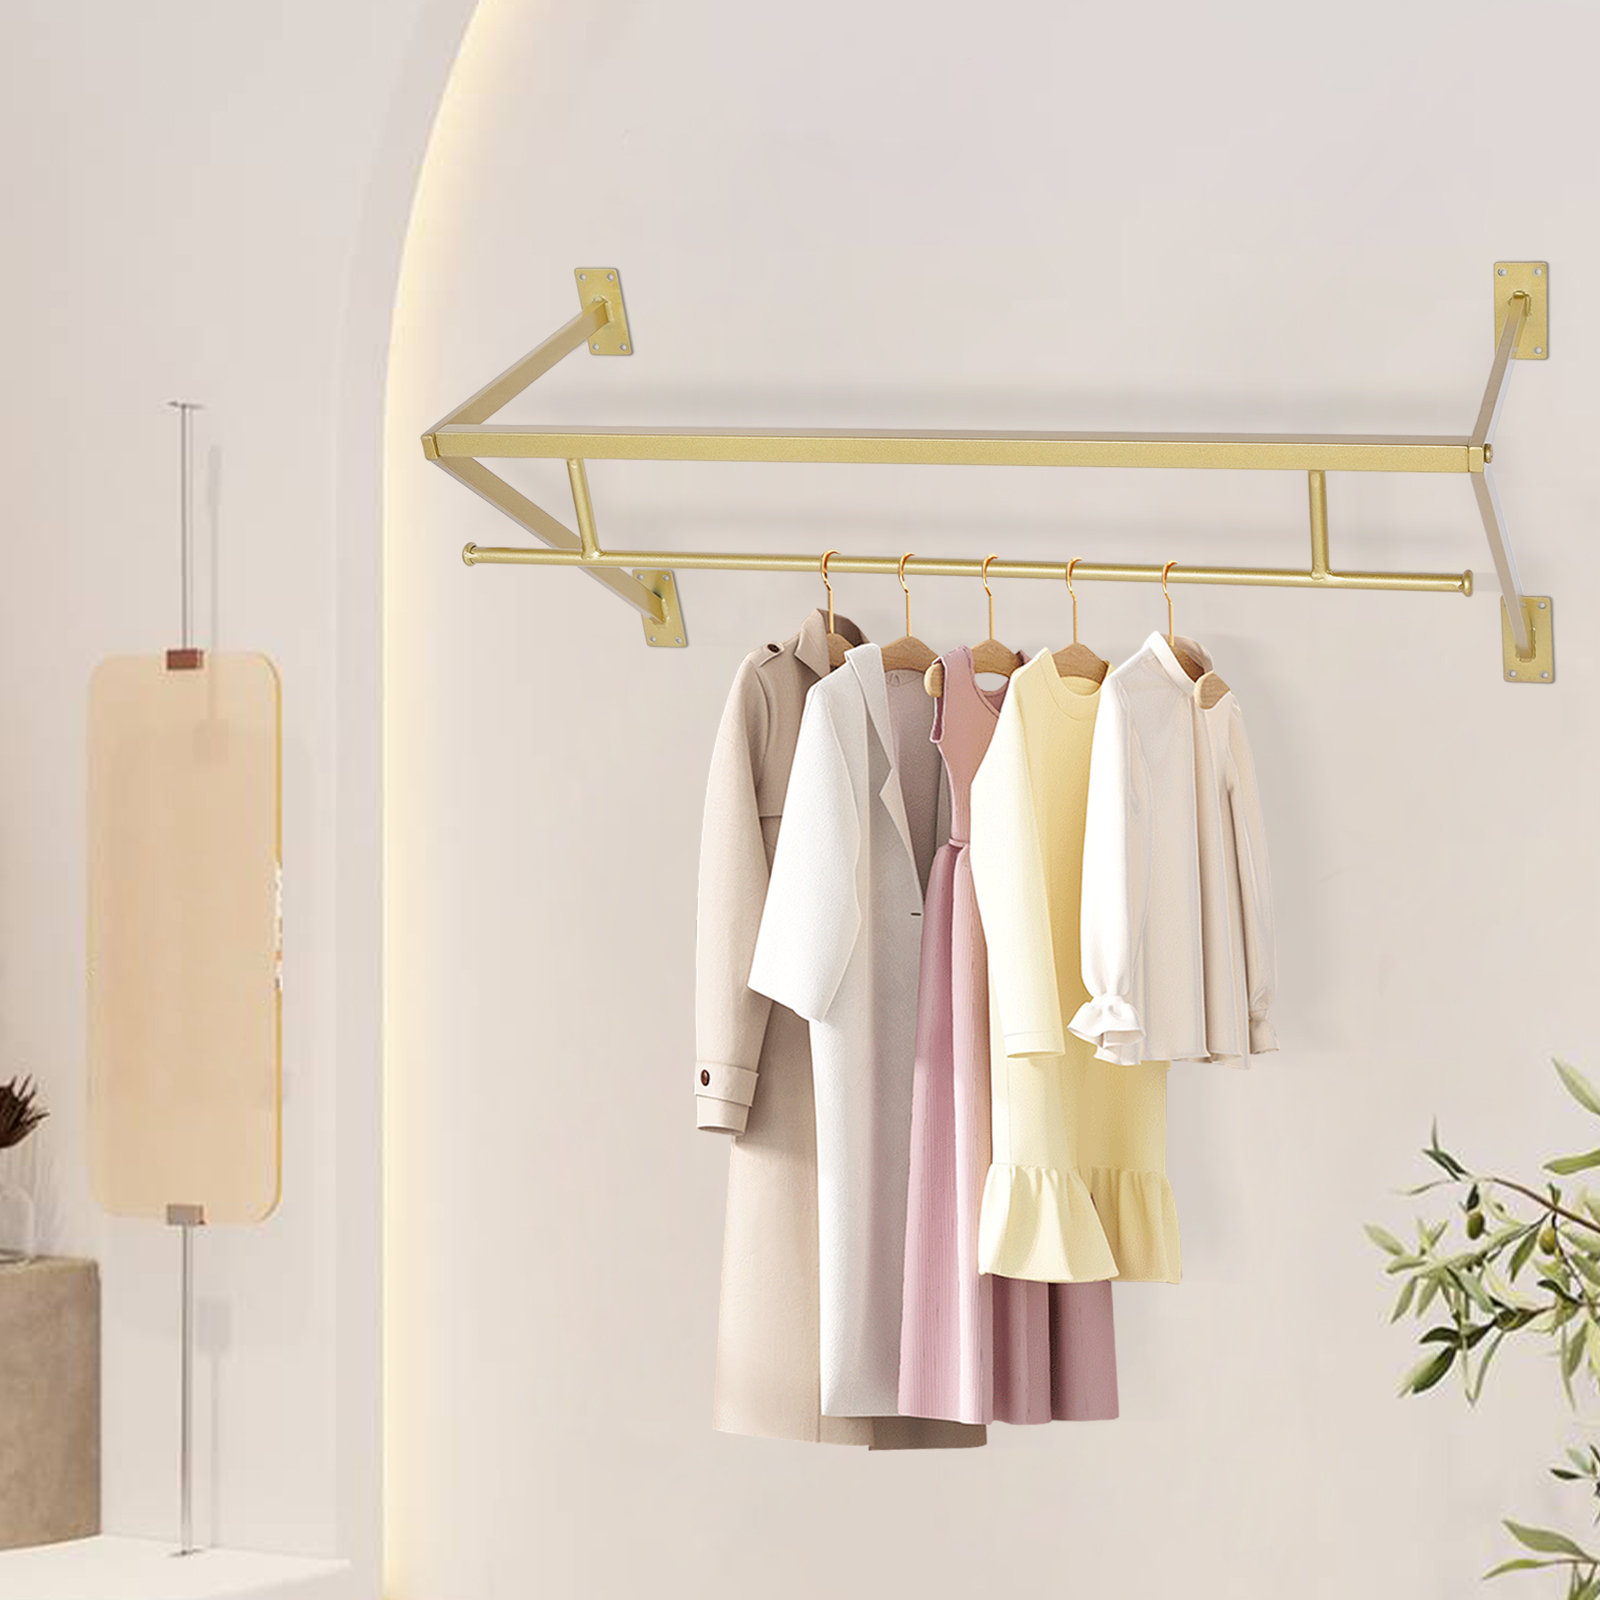 Everly Quinn 31.5'' Wall Mounted Clothes Rack Industrial Pipe Display ...